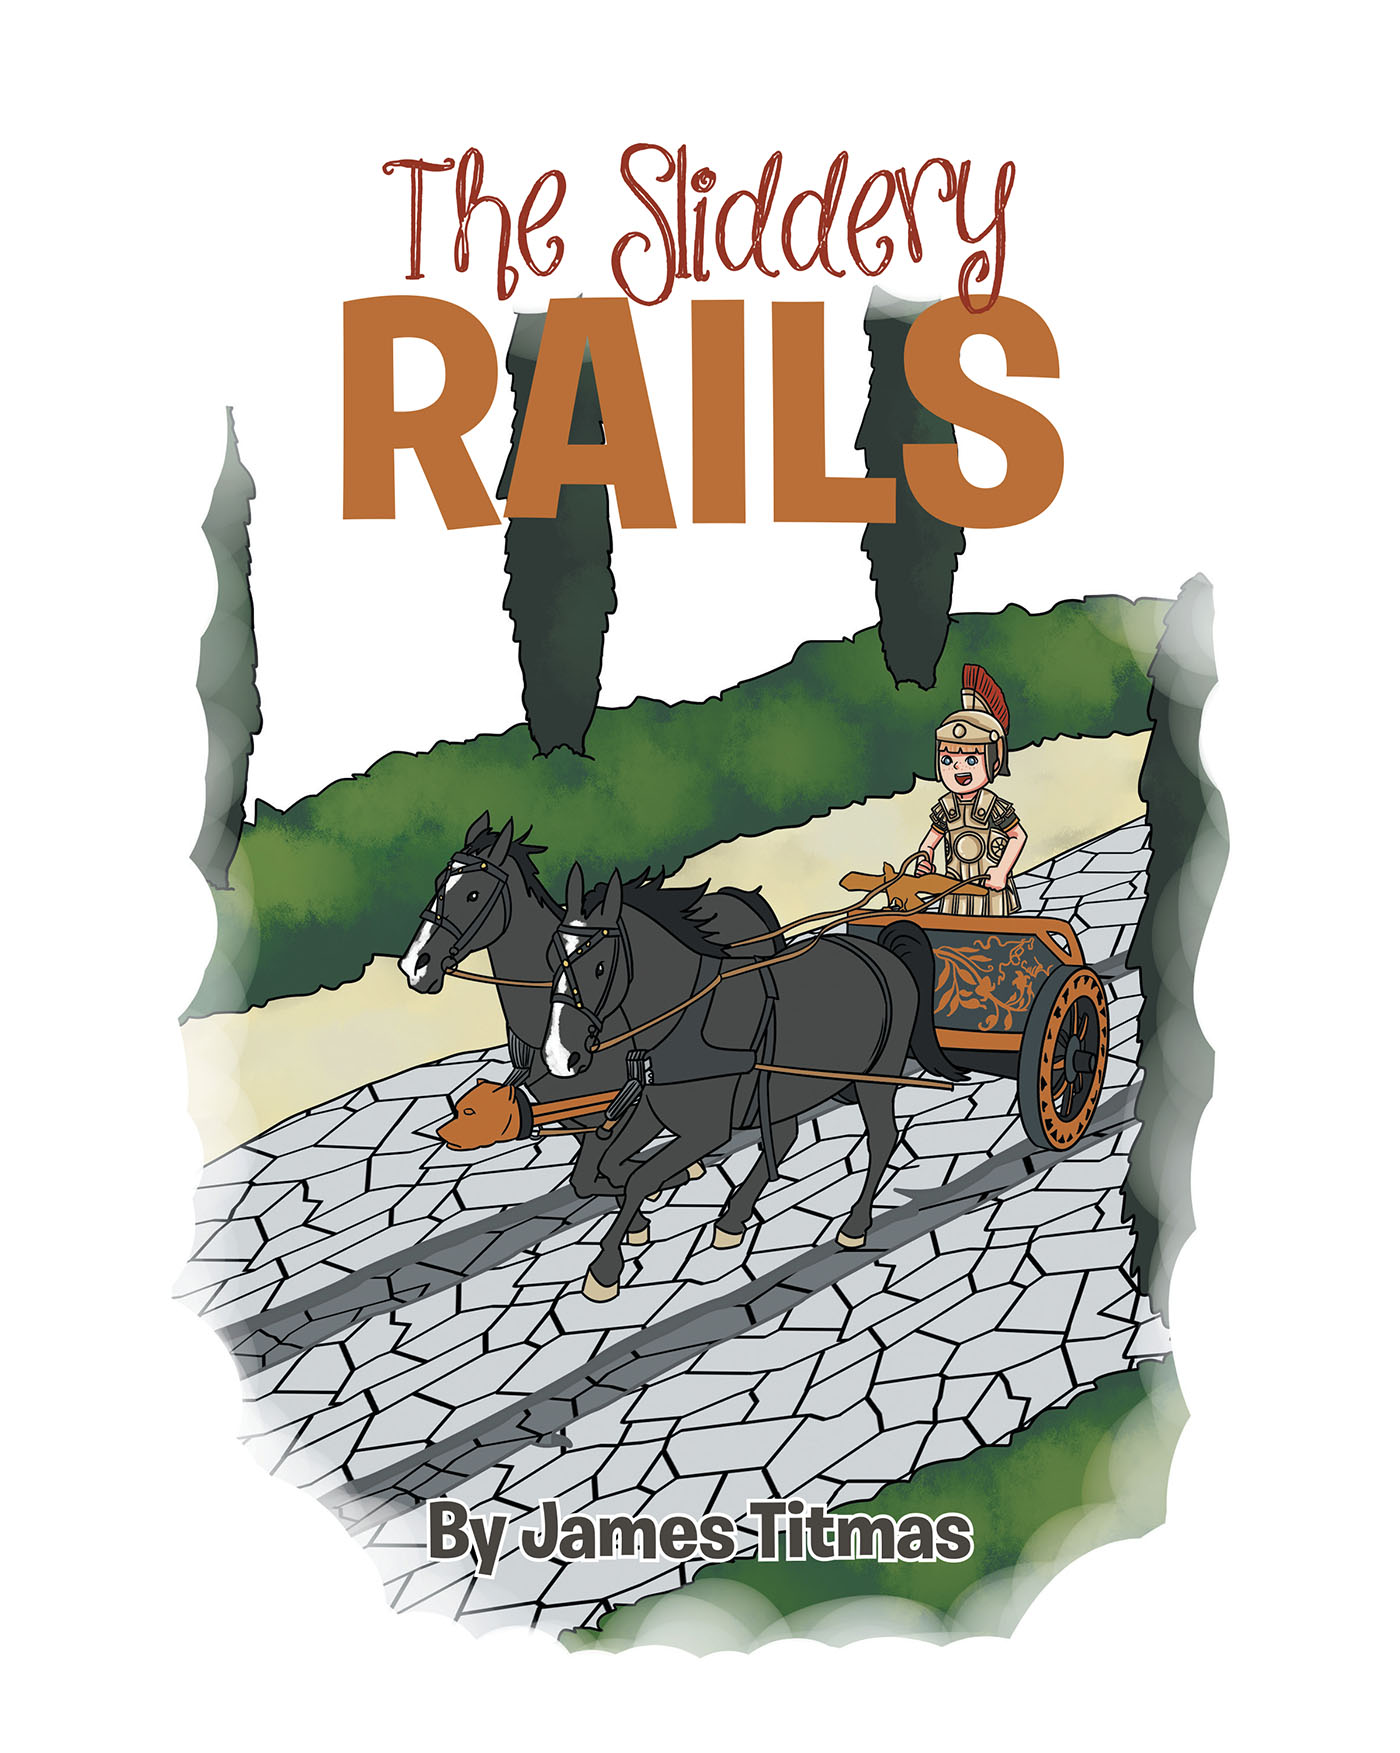 James Titmas’s New Book "The Sliddery Rails" is a Fun, Yet Informative, Children’s Tale About the History of Railroads and the Engineering Required to Make Them Work